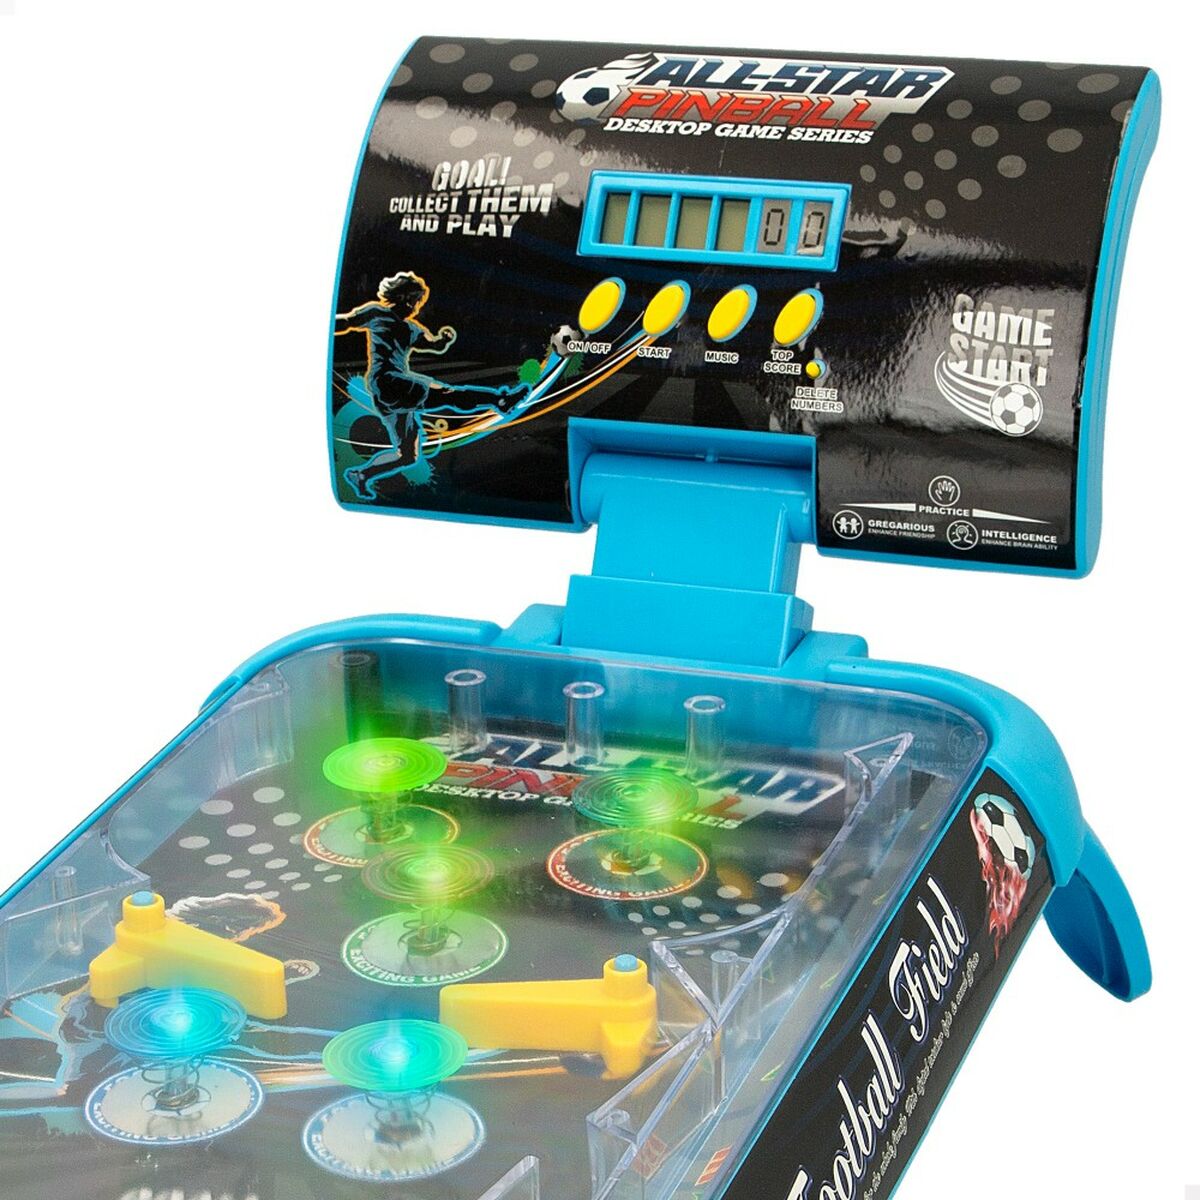 Board game Colorbaby Pinball (2 Units)